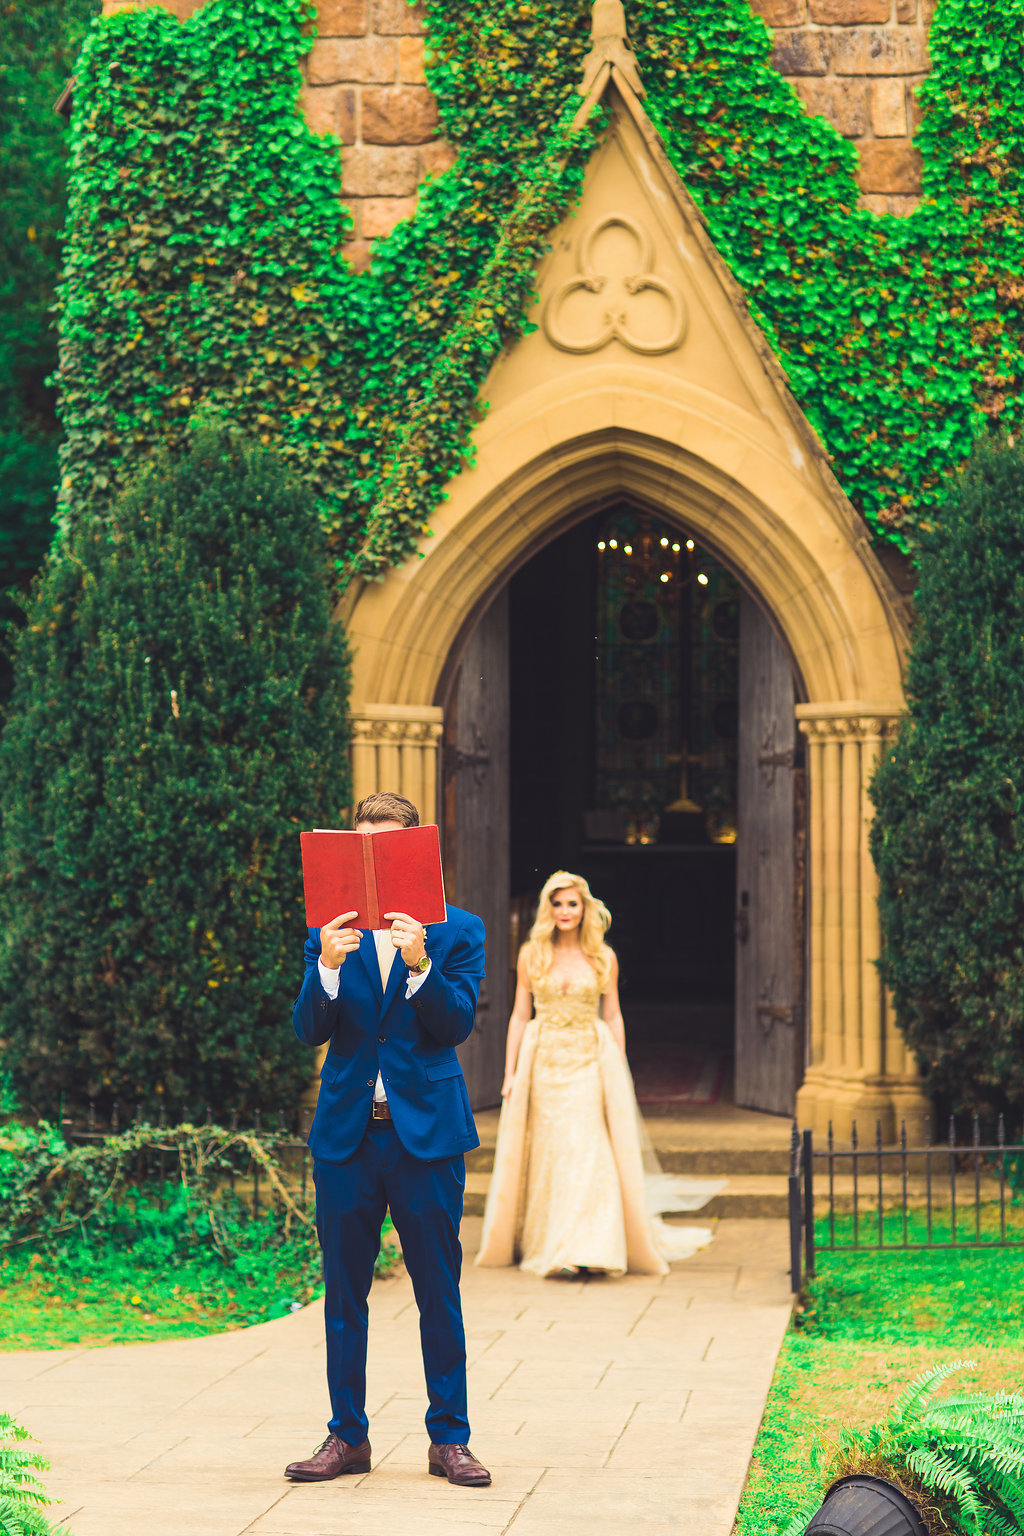 Wedding Photograph Of Groom in Blue Suit and Bride in Dress Los Angeles